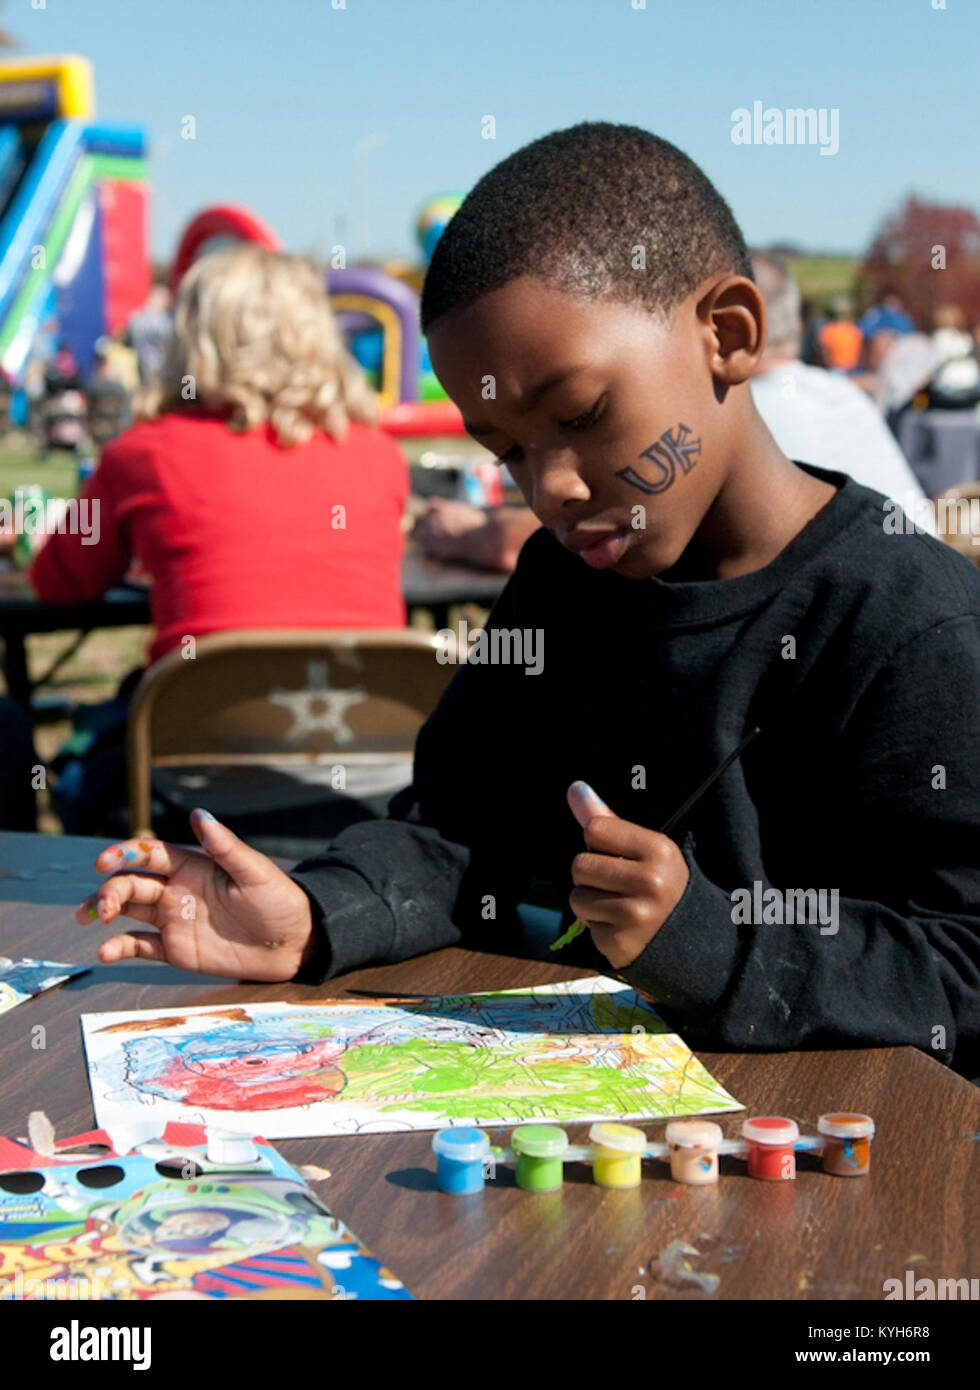 Adarius Hite, son of Kentucky Air National Guard member 2nd Lt. Angela Hite, paints pictures during Family Day at the 123rd Airlift Wing in Louisville, Ky., Oct. 21, 2012.  (Kentucky Air National Guard photo by Senior Airman Vicky Spesard) Stock Photo